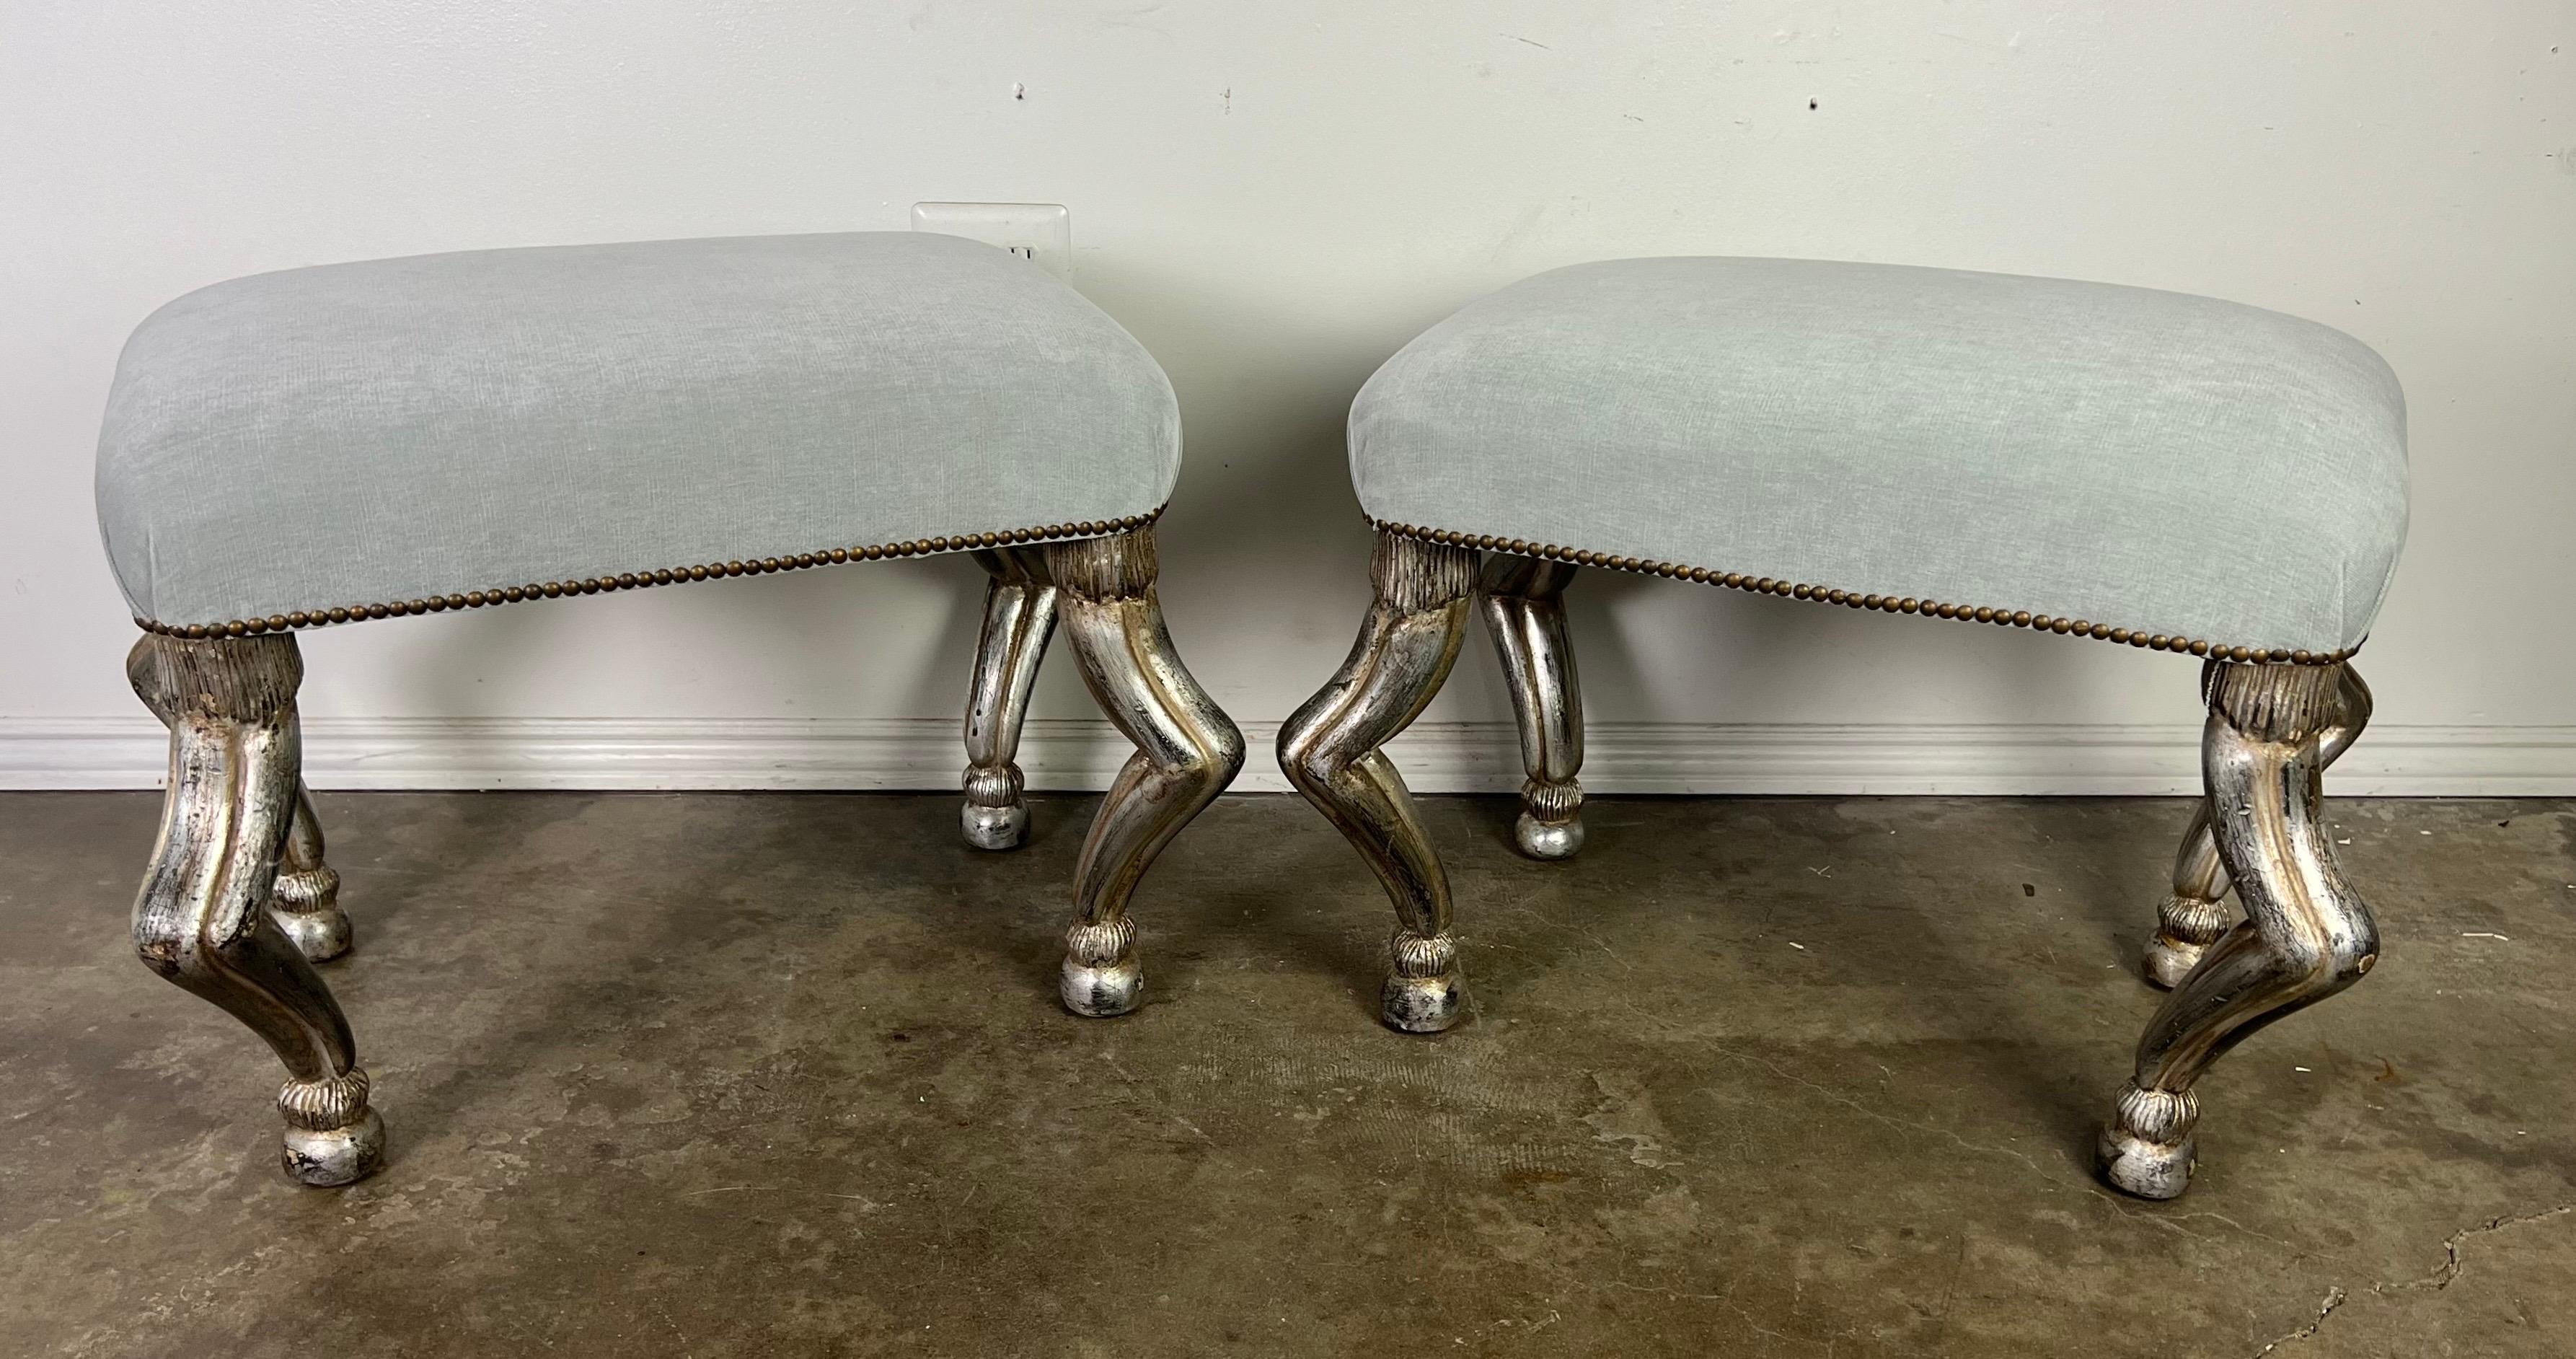 A pair of elegant benches, each enveloped in soft grayish-blue velvet, exuding a serene and sophisticated charm.  

The benches are distinguished by their four striking silver legs, each sculpted in the style of antelope legs.  They add a touch of